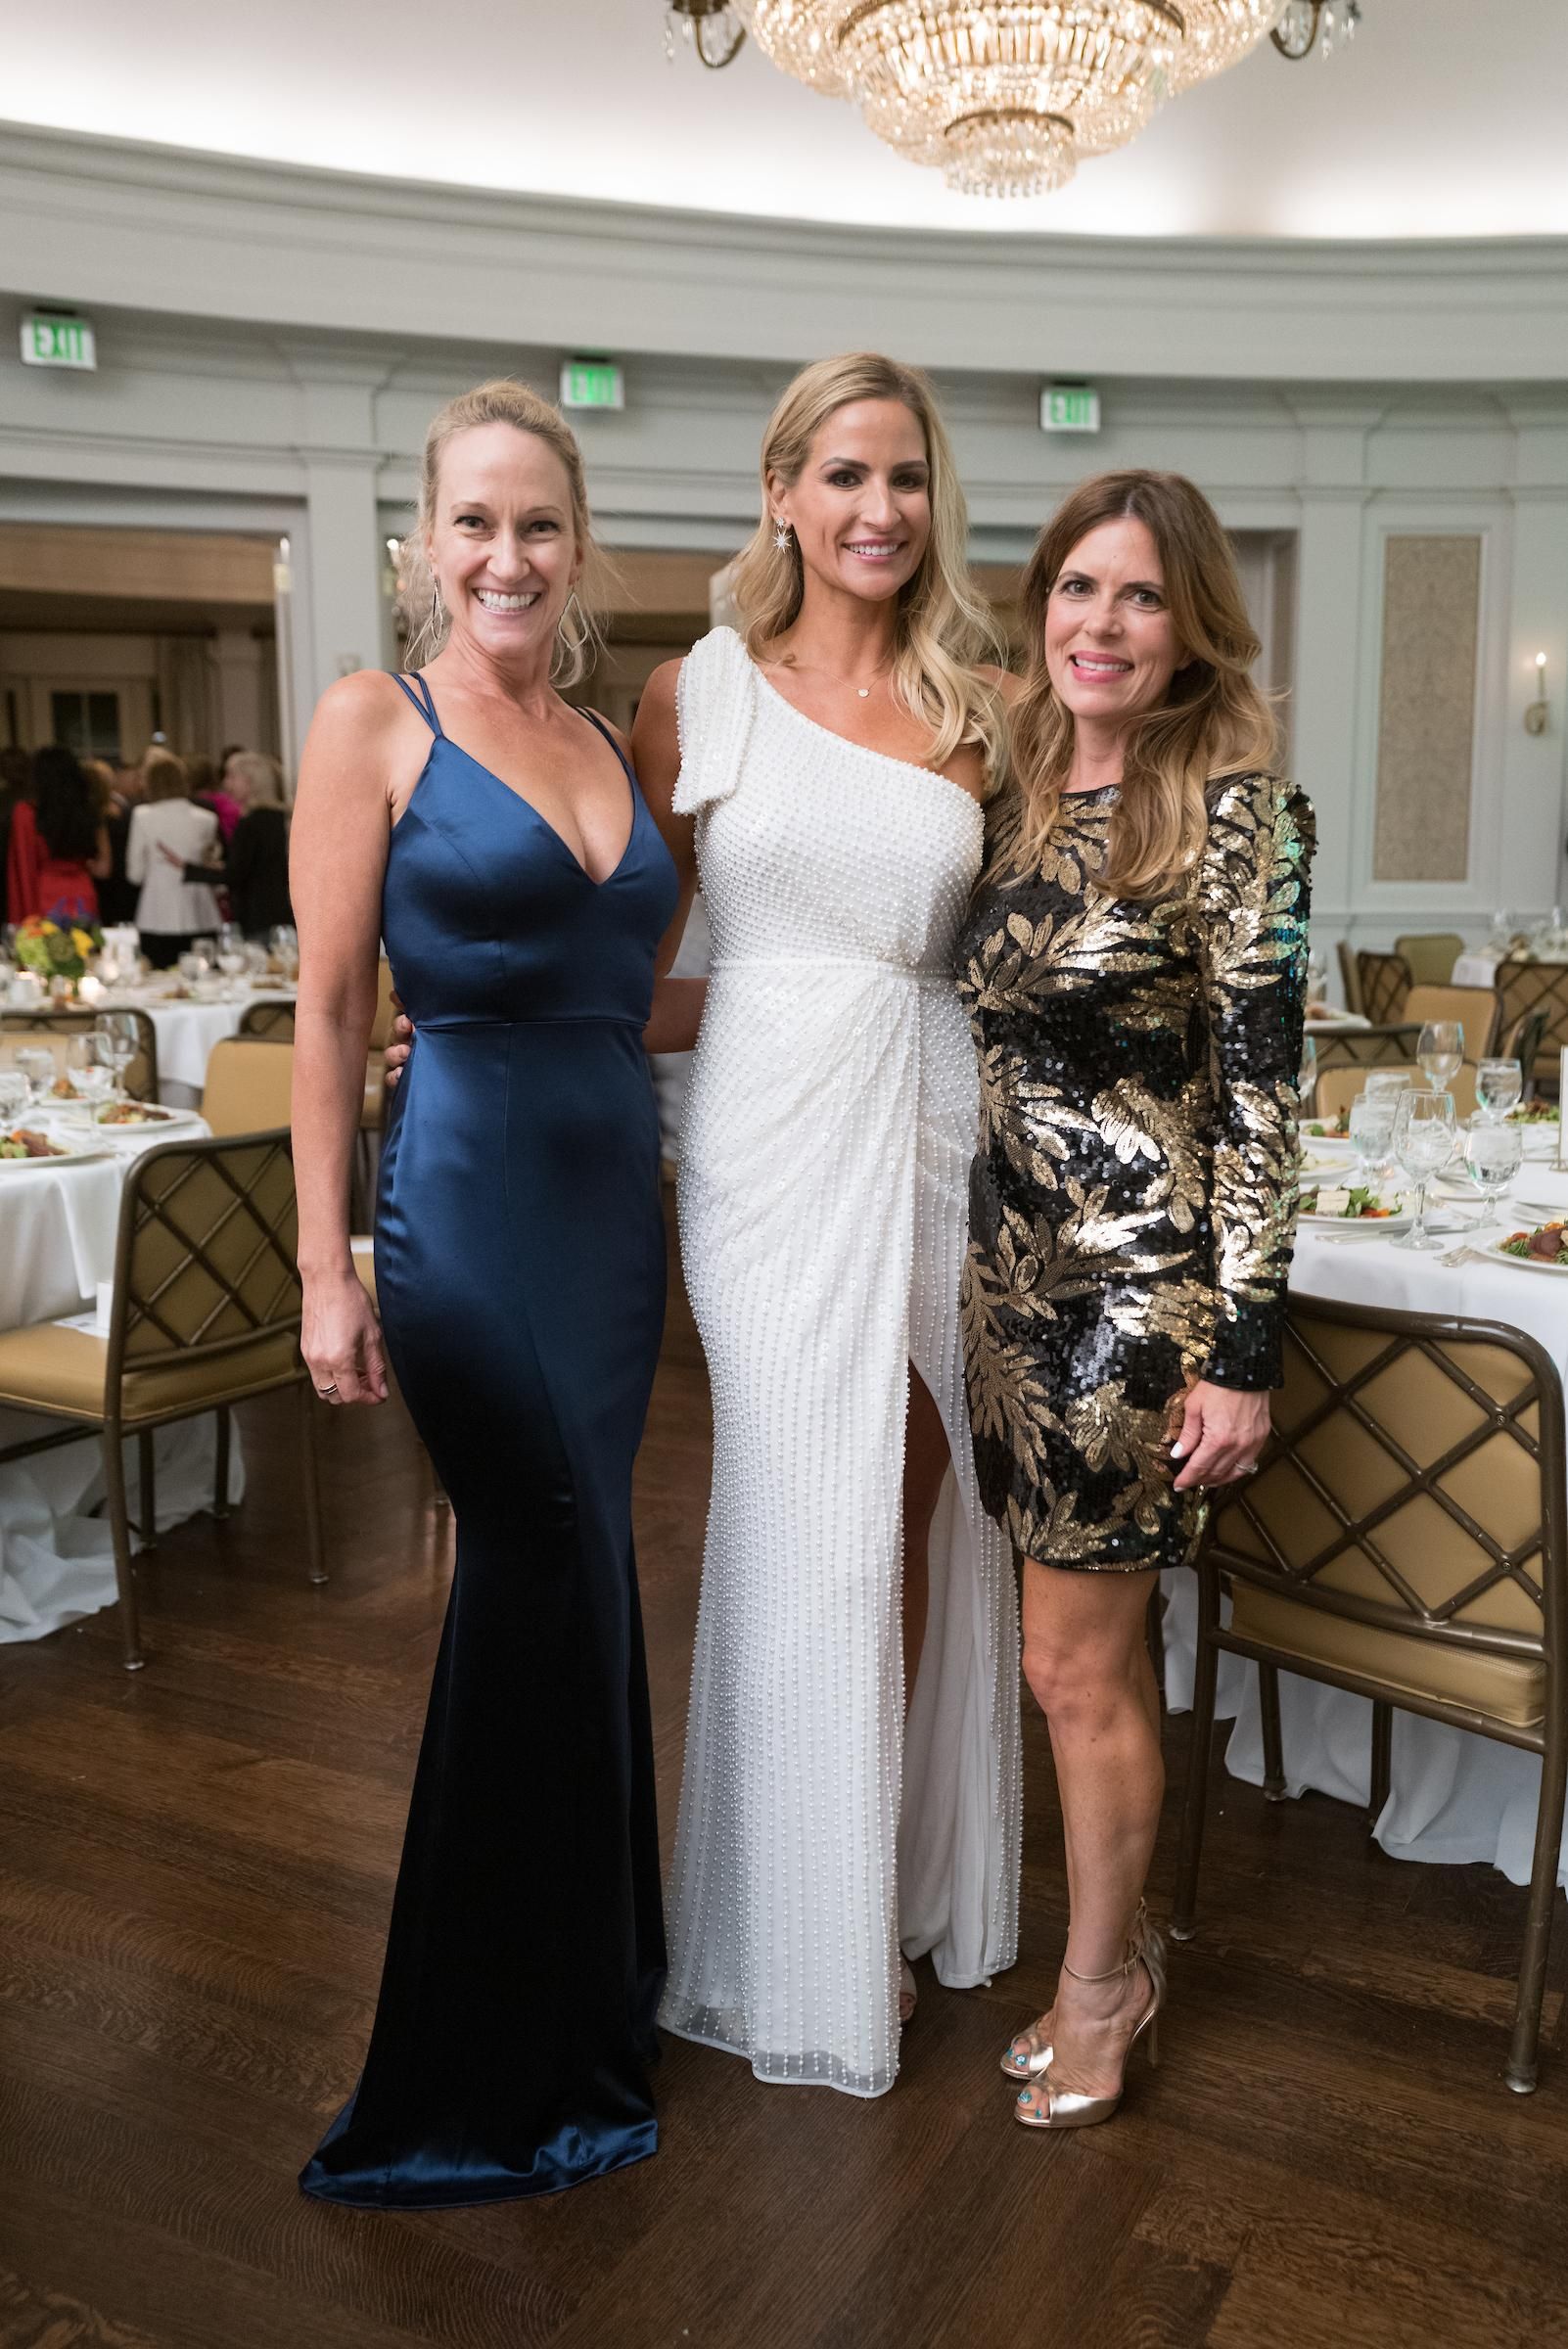 Prominent sports power couple lends a helping hand to deserving families at  $525,000 HelpCureHD gala - CultureMap Houston